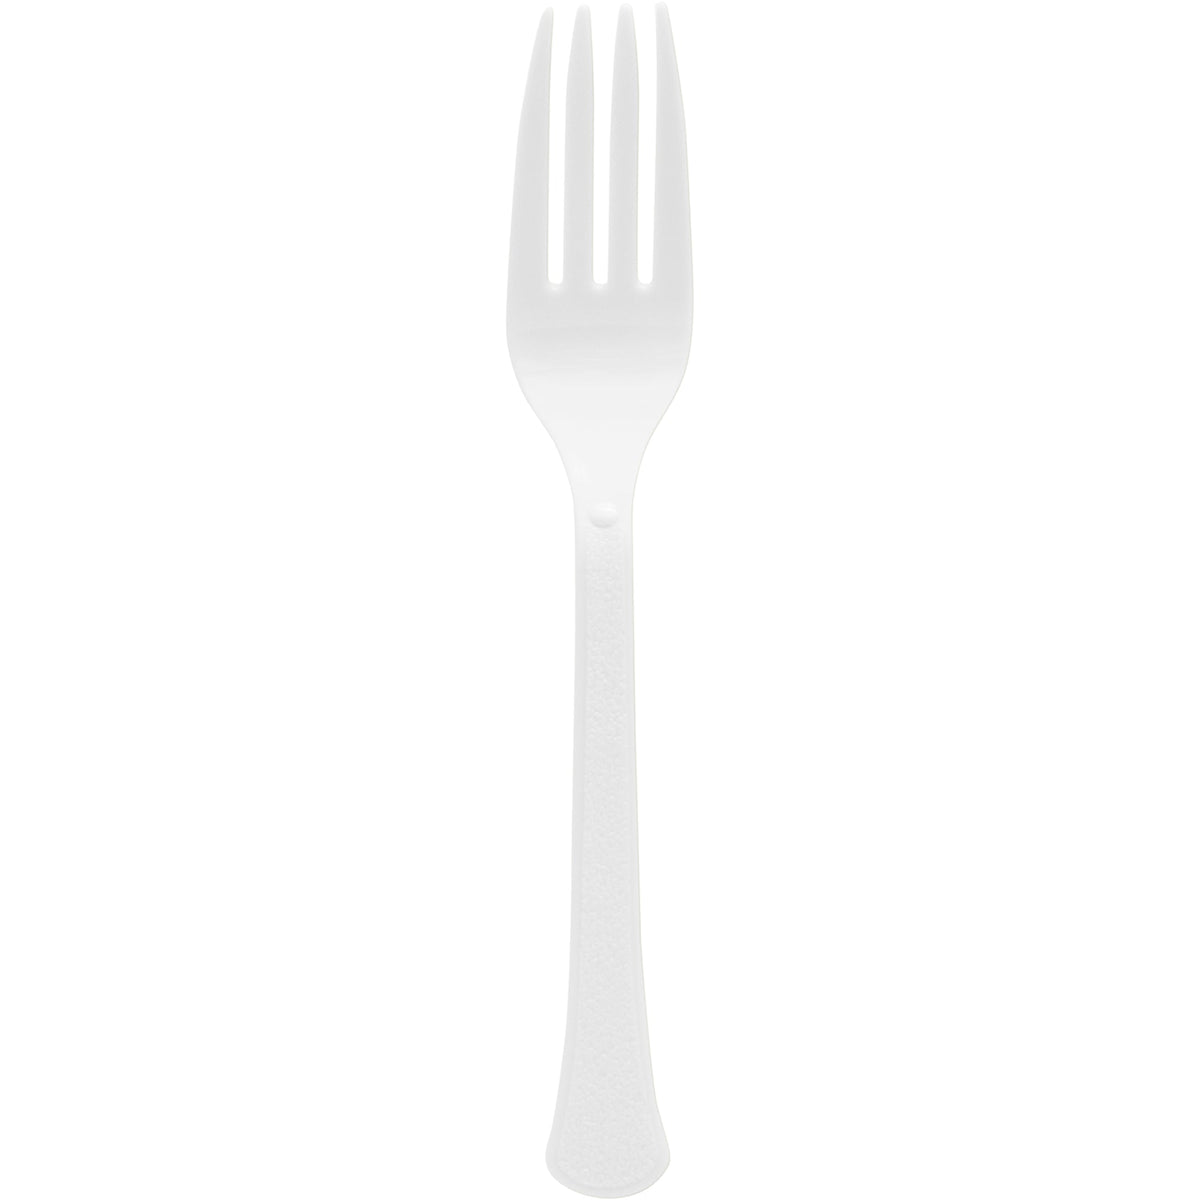 Frosty White 50 Count Heavyweight PP( Polypropylene) Reusable Plastic Forks